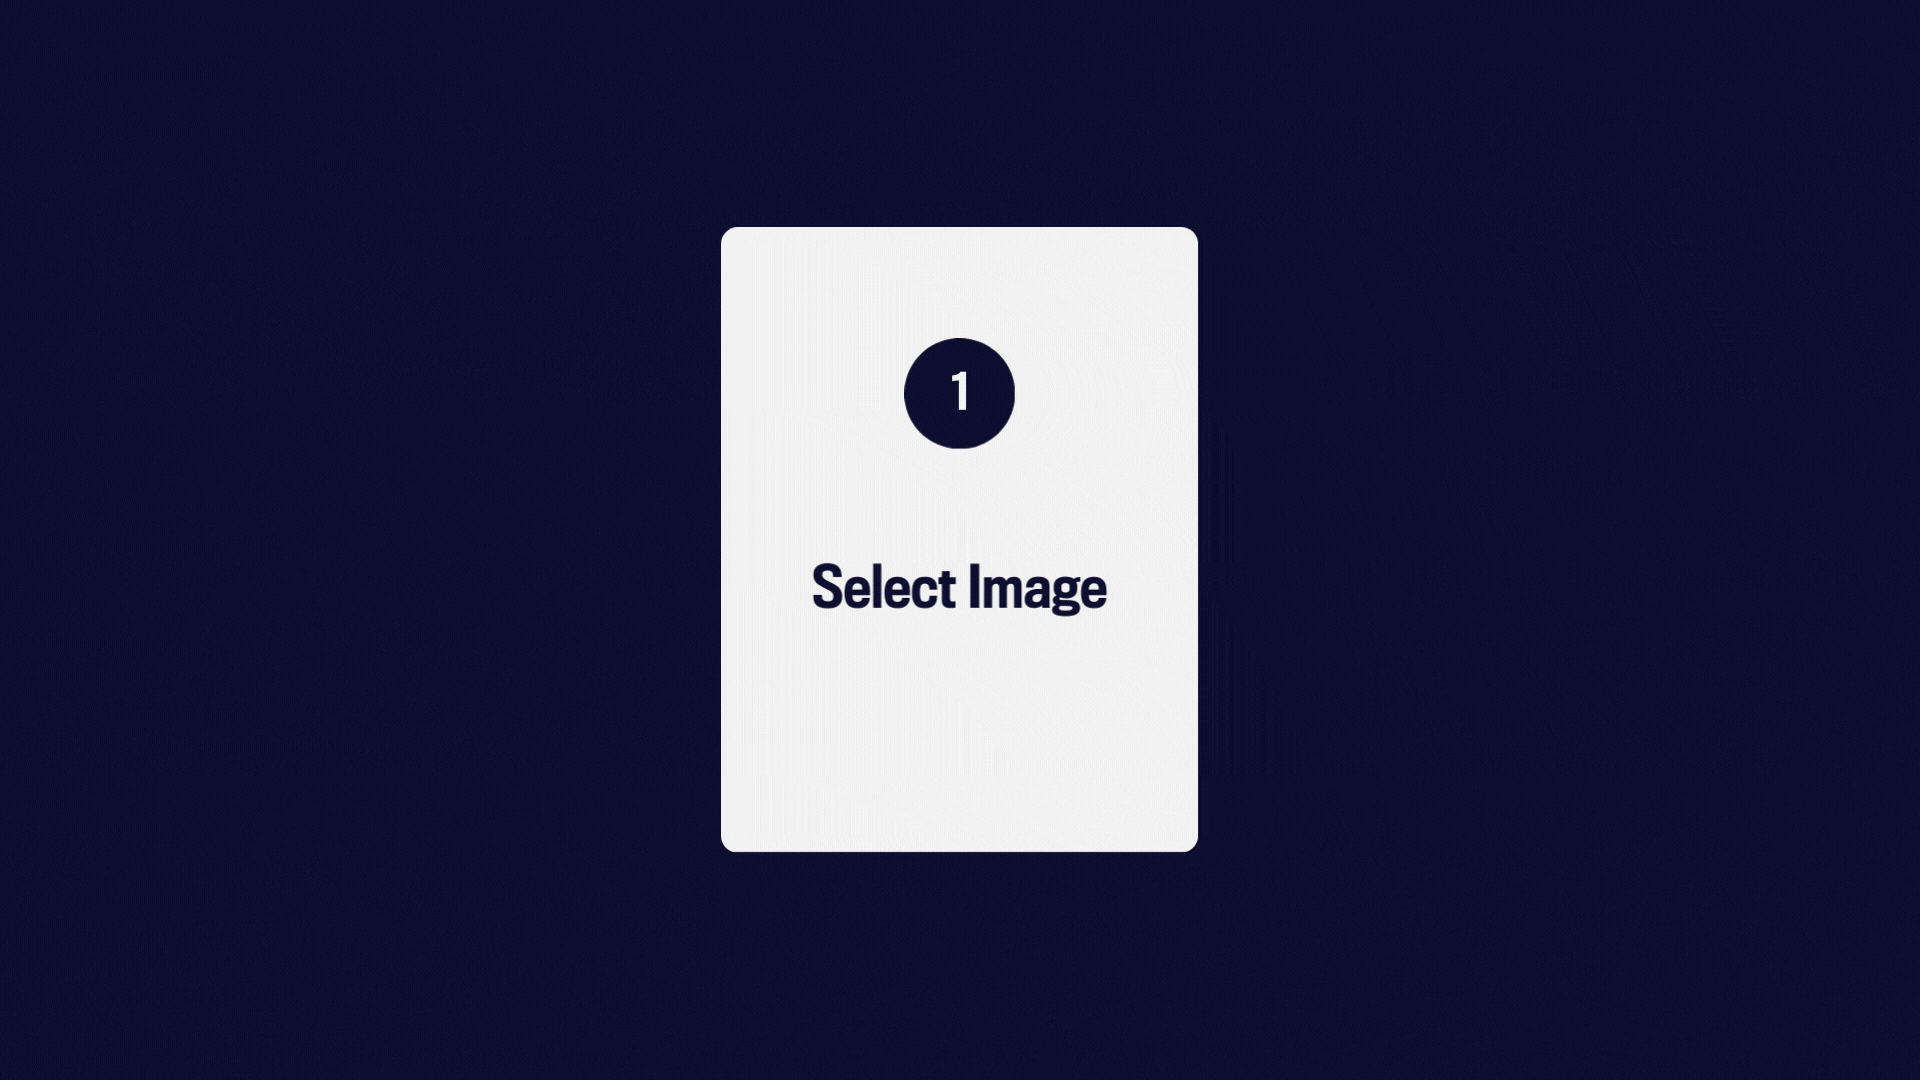 How to select an image